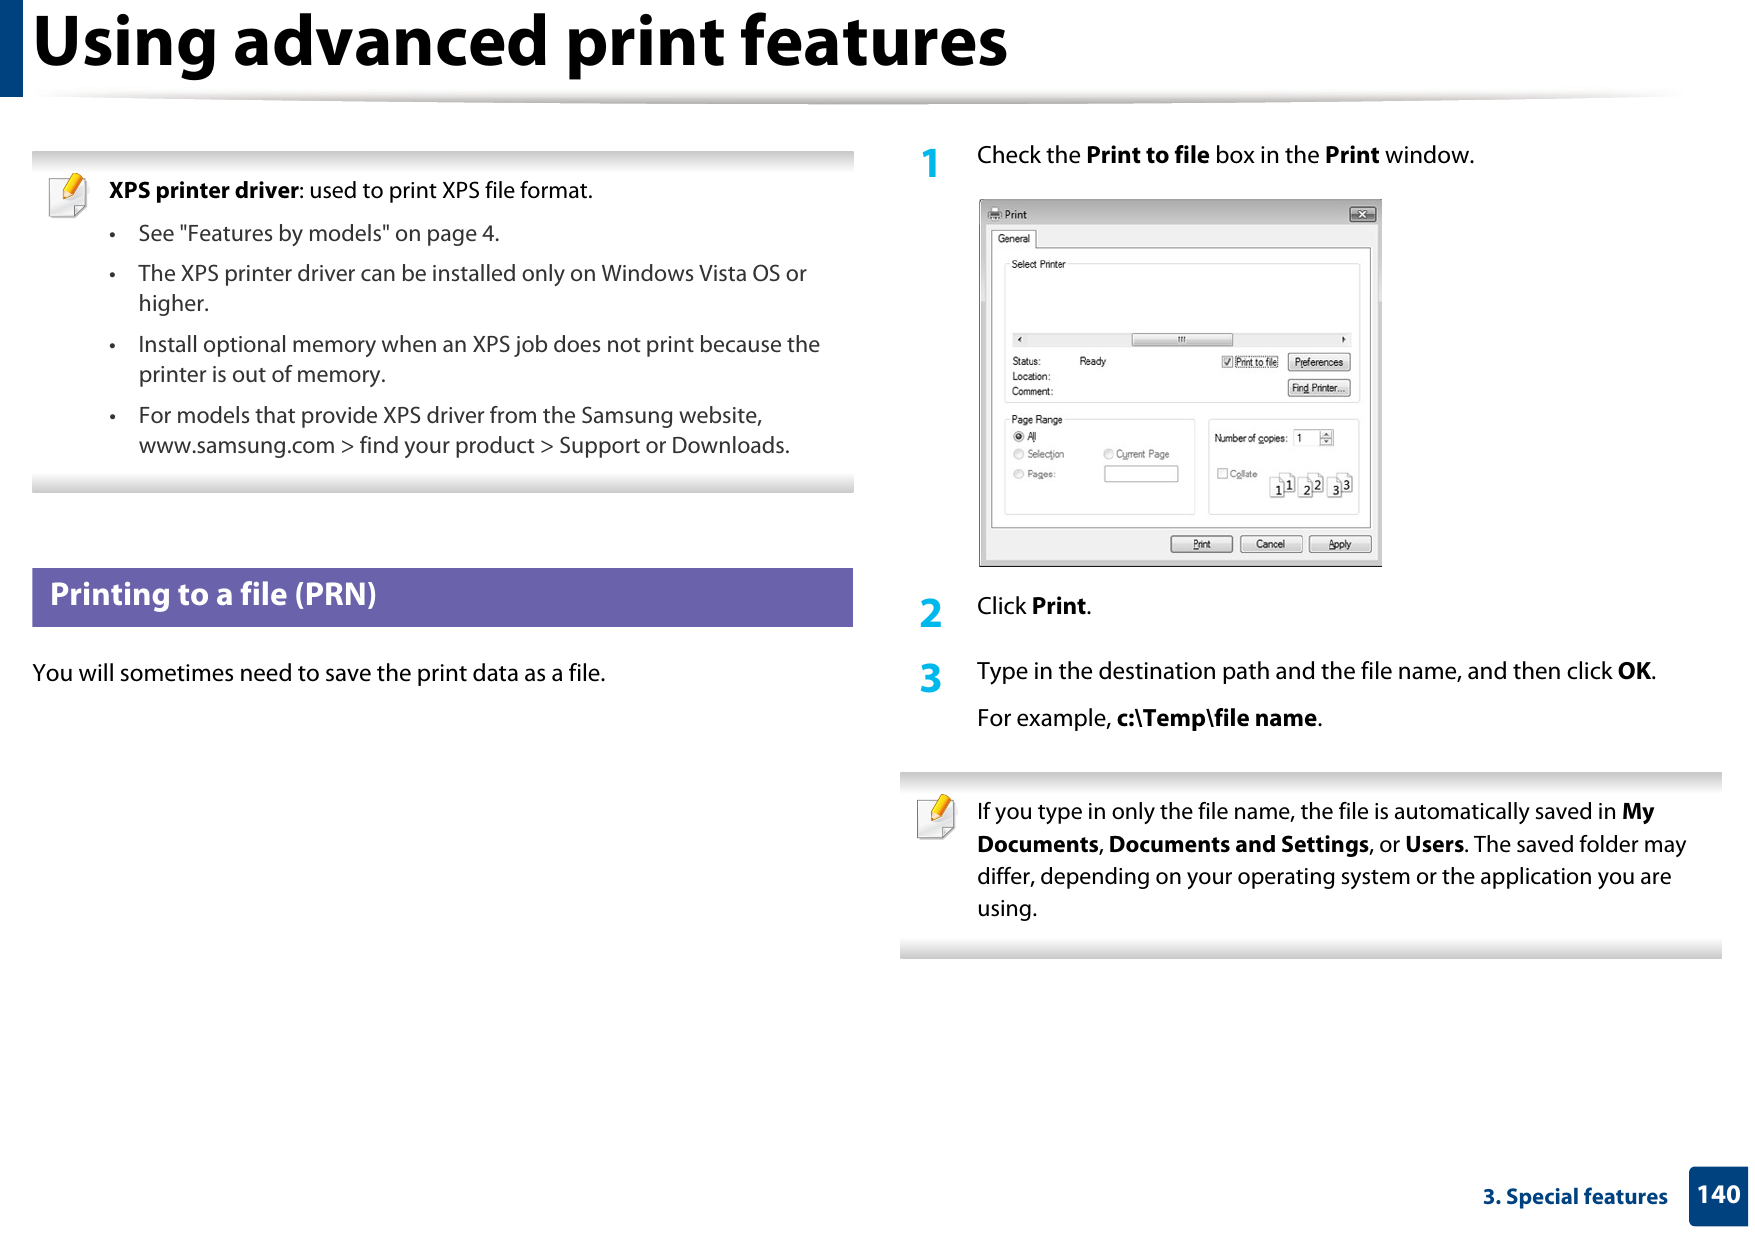 1403. Special featuresUsing advanced print features XPS printer driver: used to print XPS file format. • See &quot;Features by models&quot; on page 4.• The XPS printer driver can be installed only on Windows Vista OS or higher.• Install optional memory when an XPS job does not print because the printer is out of memory.• For models that provide XPS driver from the Samsung website, www.samsung.com &gt; find your product &gt; Support or Downloads. 1 Printing to a file (PRN)You will sometimes need to save the print data as a file. 1Check the Print to file box in the Print window.2  Click Print.3  Type in the destination path and the file name, and then click OK.For example, c:\Temp\file name. If you type in only the file name, the file is automatically saved in My Documents, Documents and Settings, or Users. The saved folder may differ, depending on your operating system or the application you are using. 